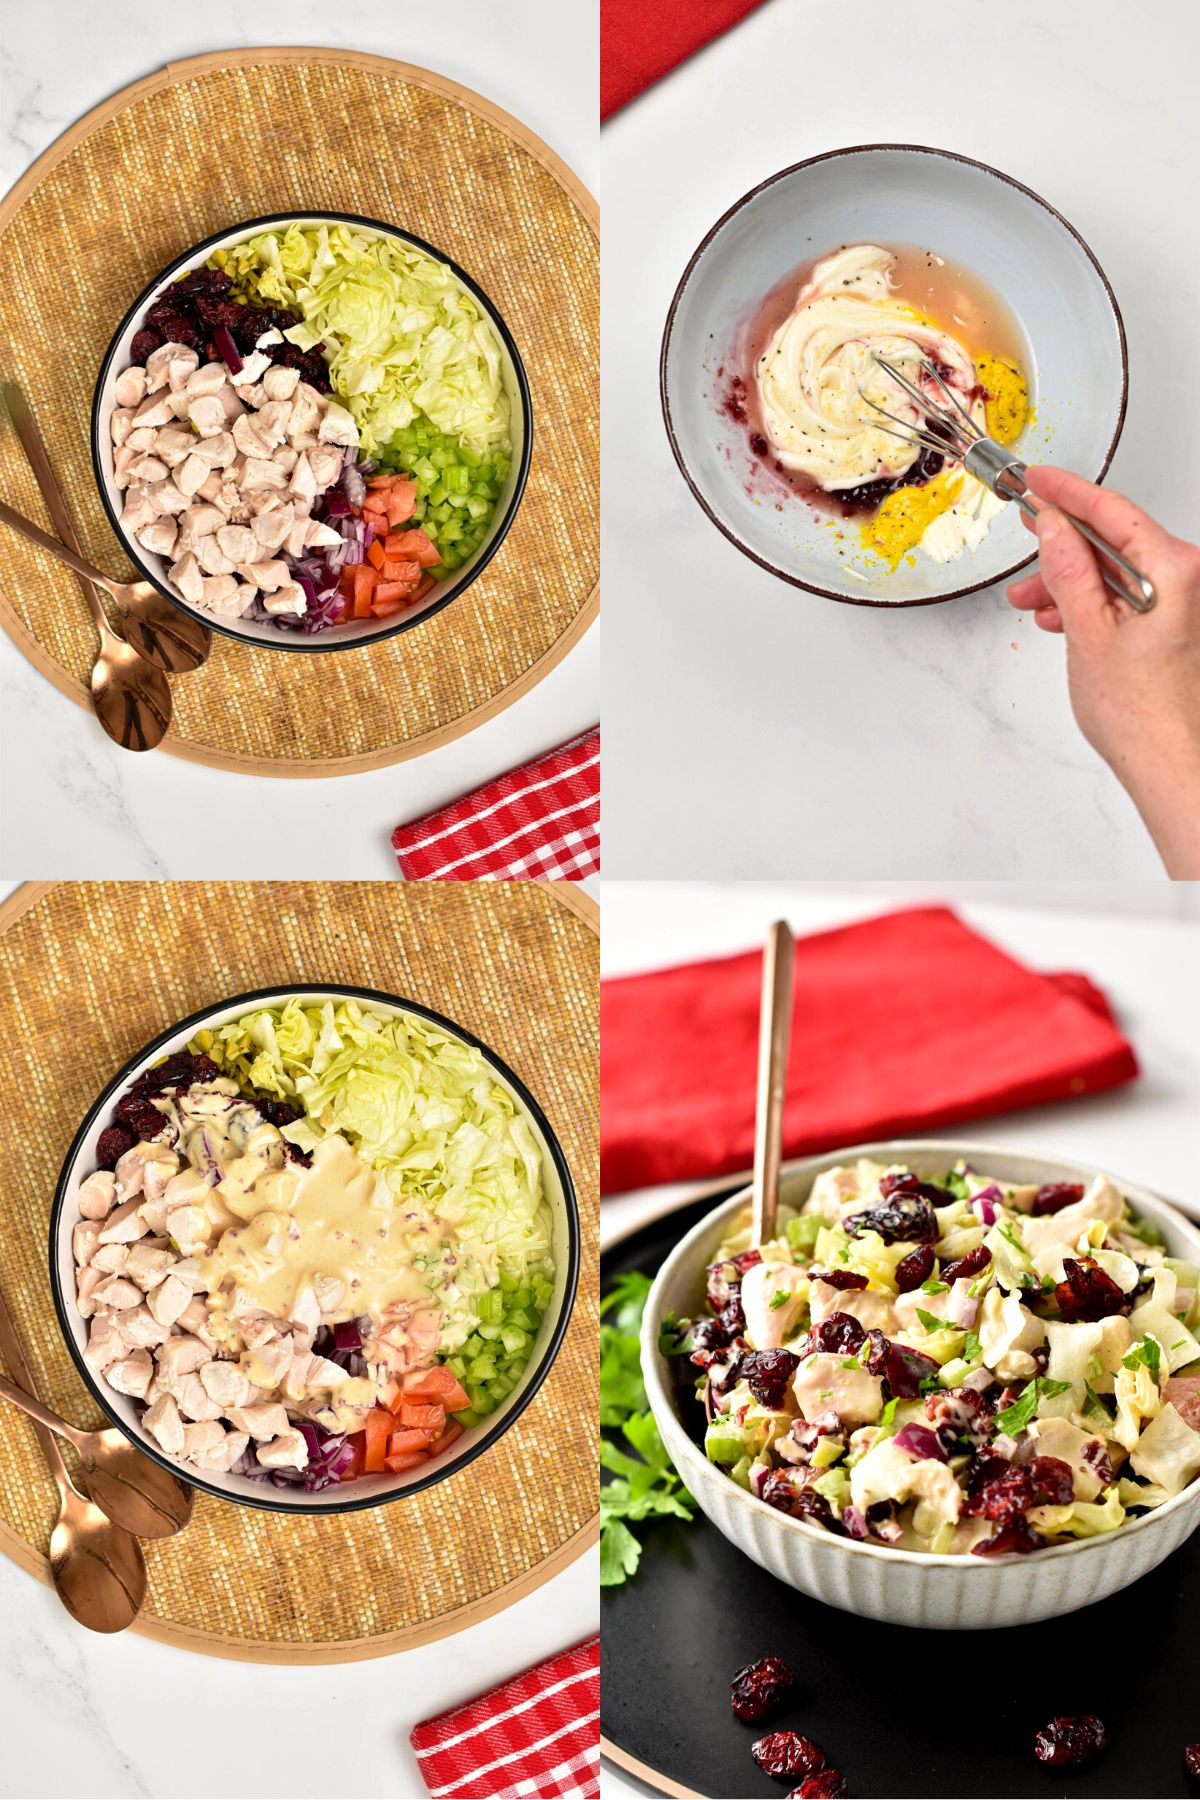 How to make Cranberry Chicken Salad